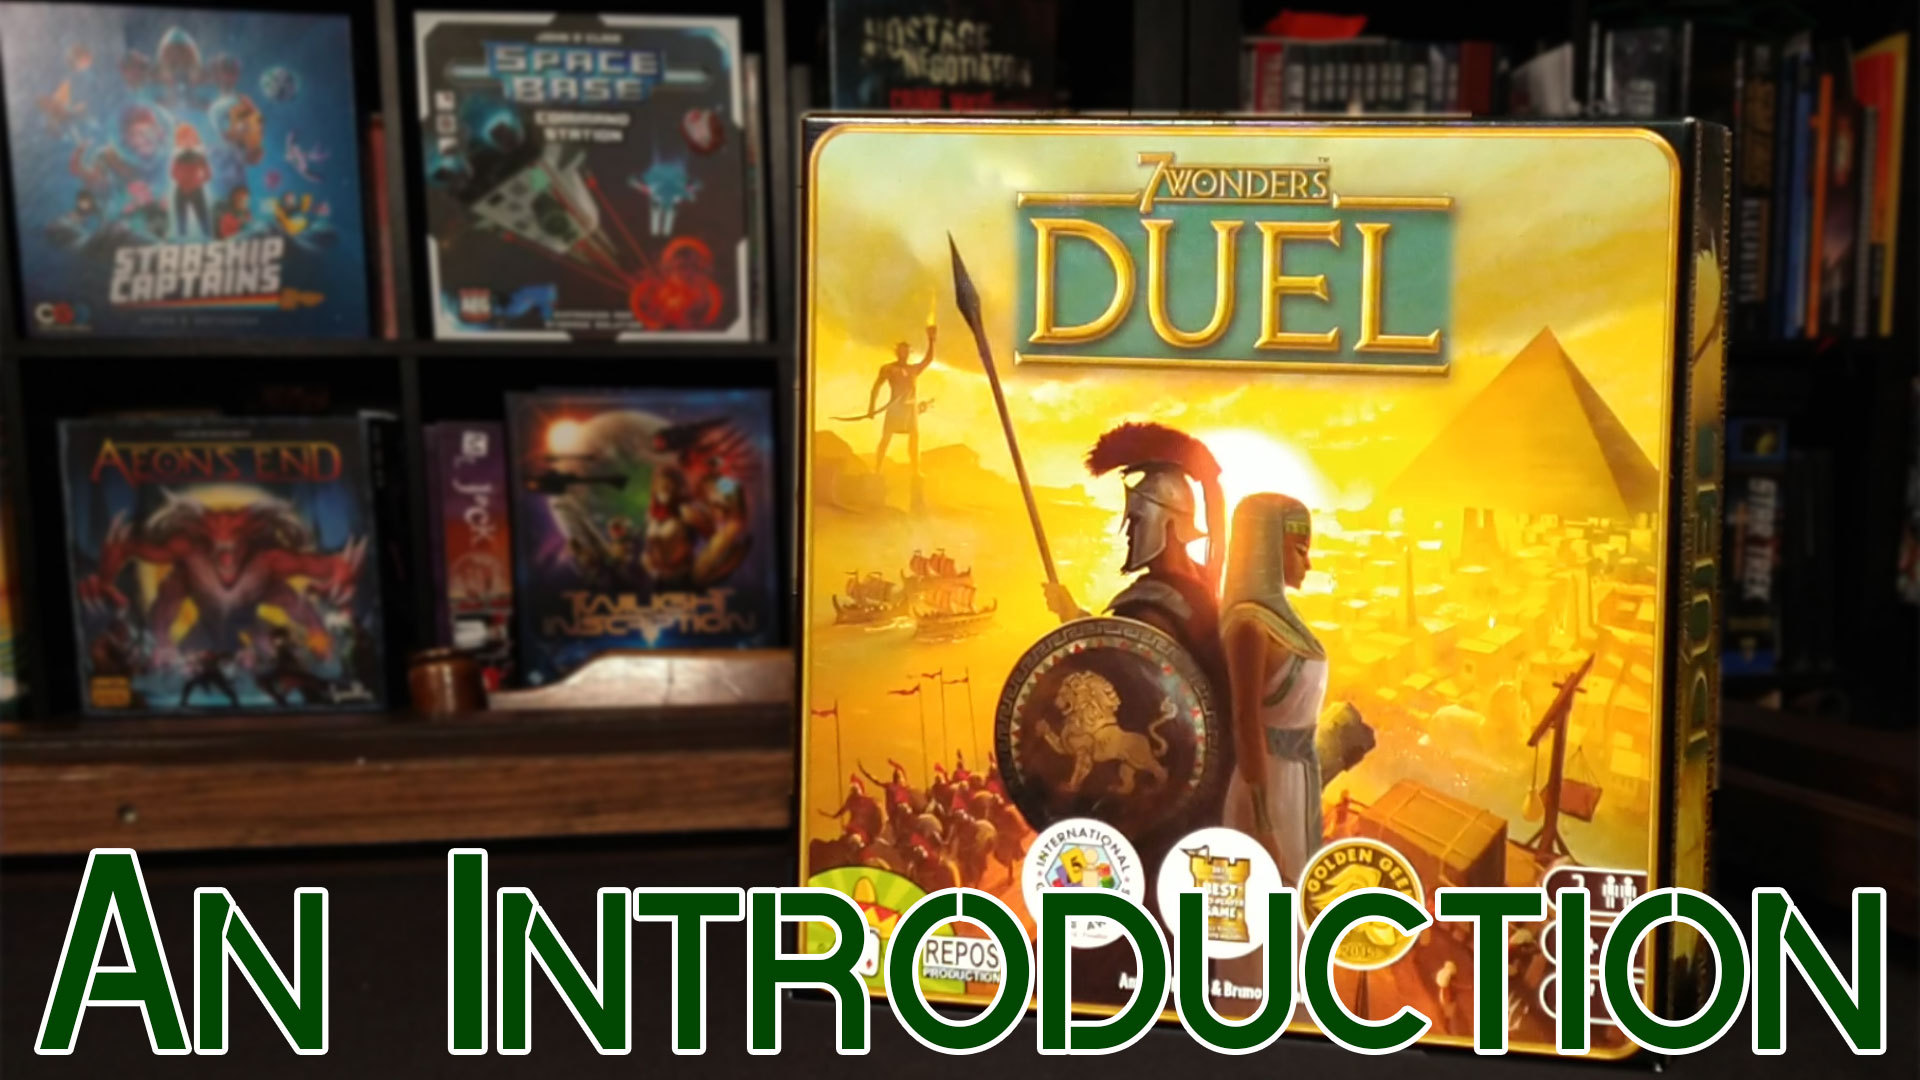 An Introduction to 7 Wonders Duel - Mantle